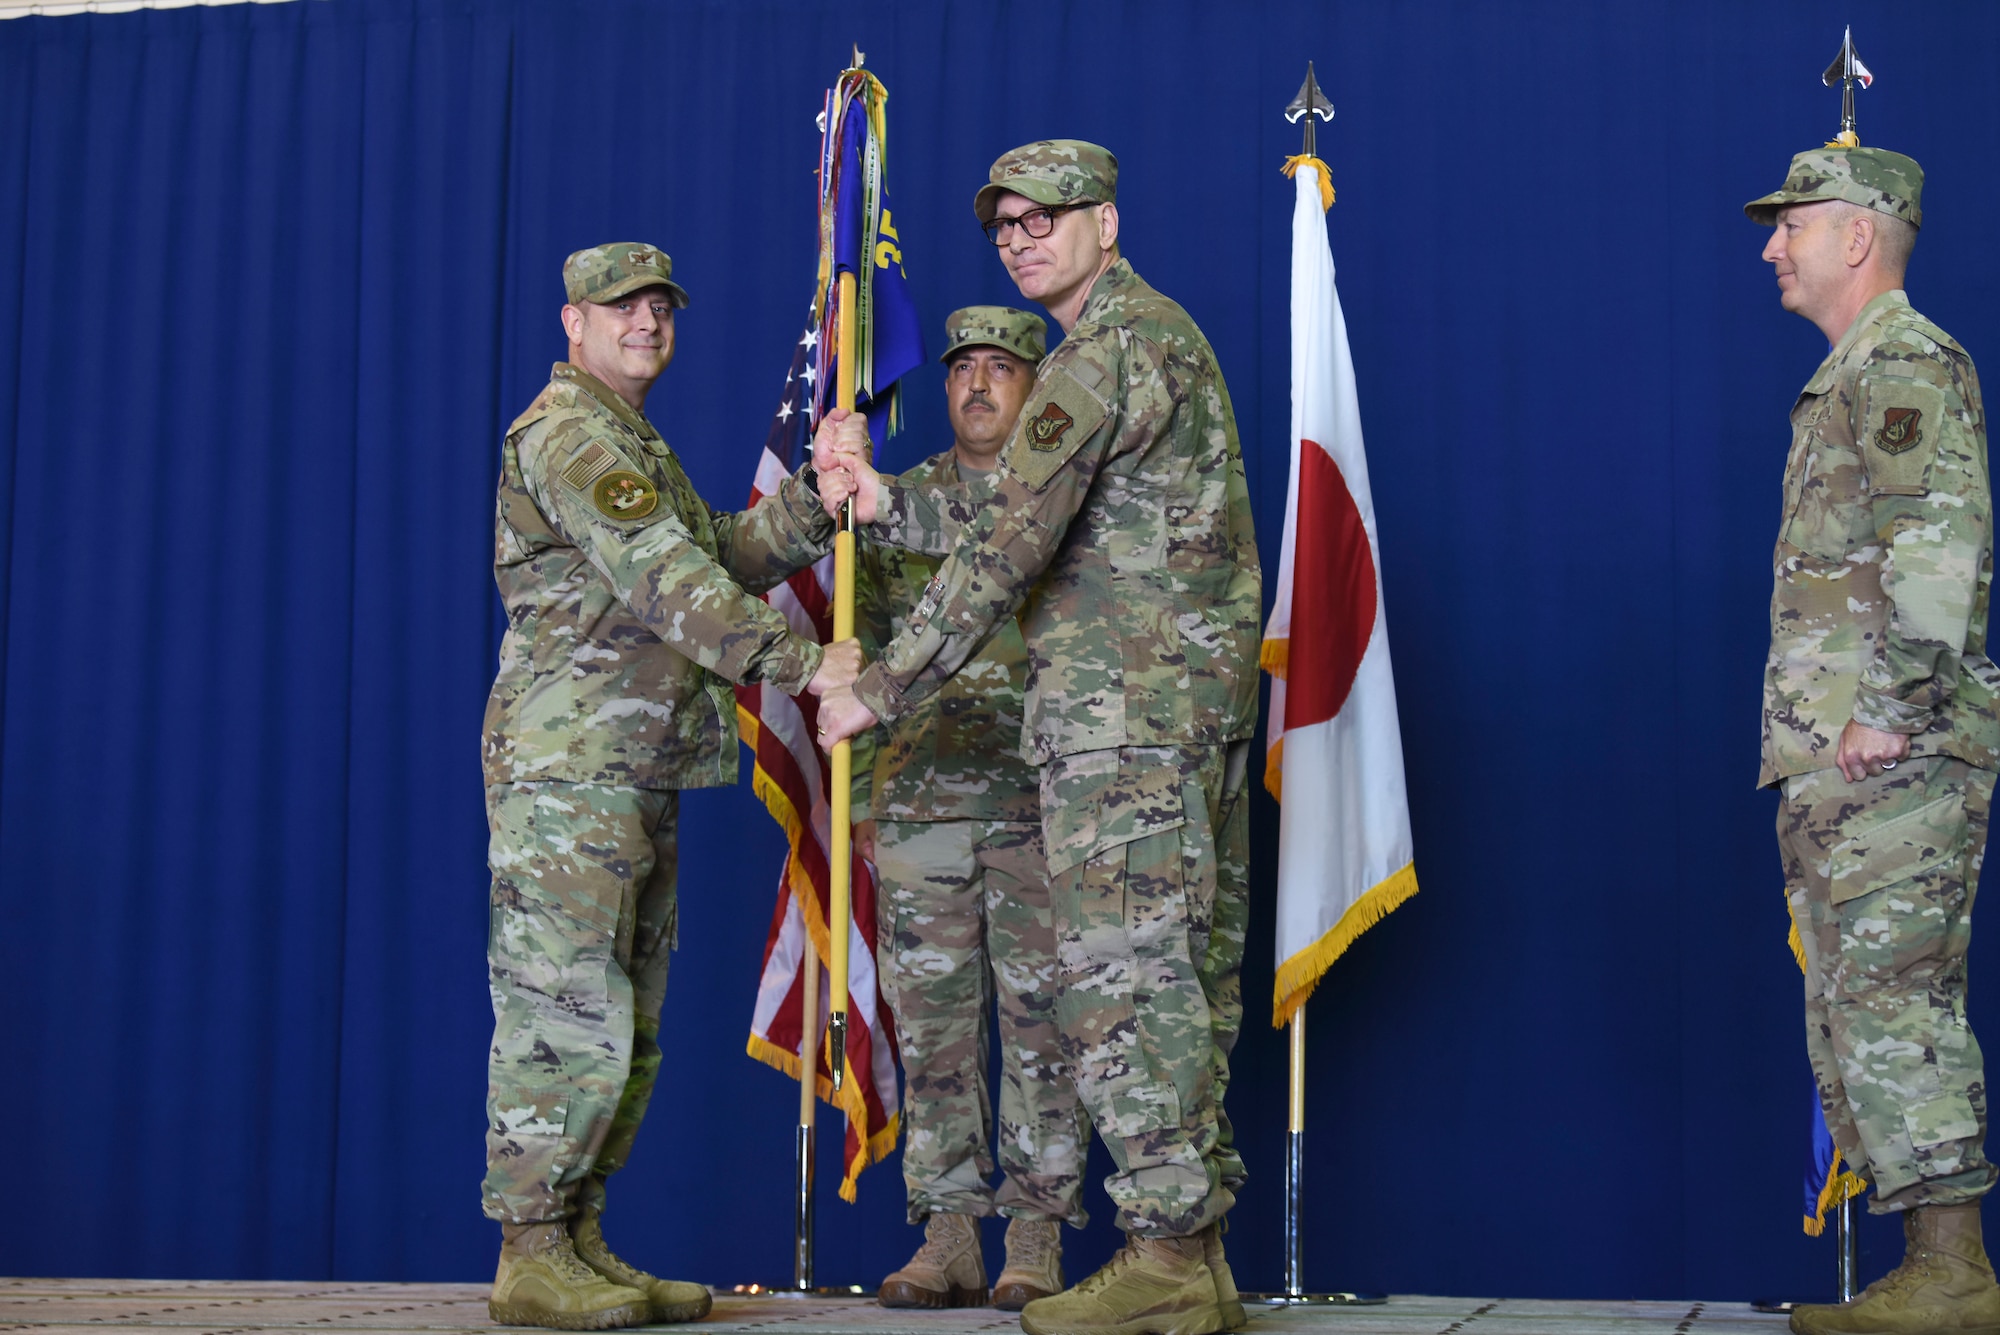 Two uniformed military members hold a guidon while looking at a picture.